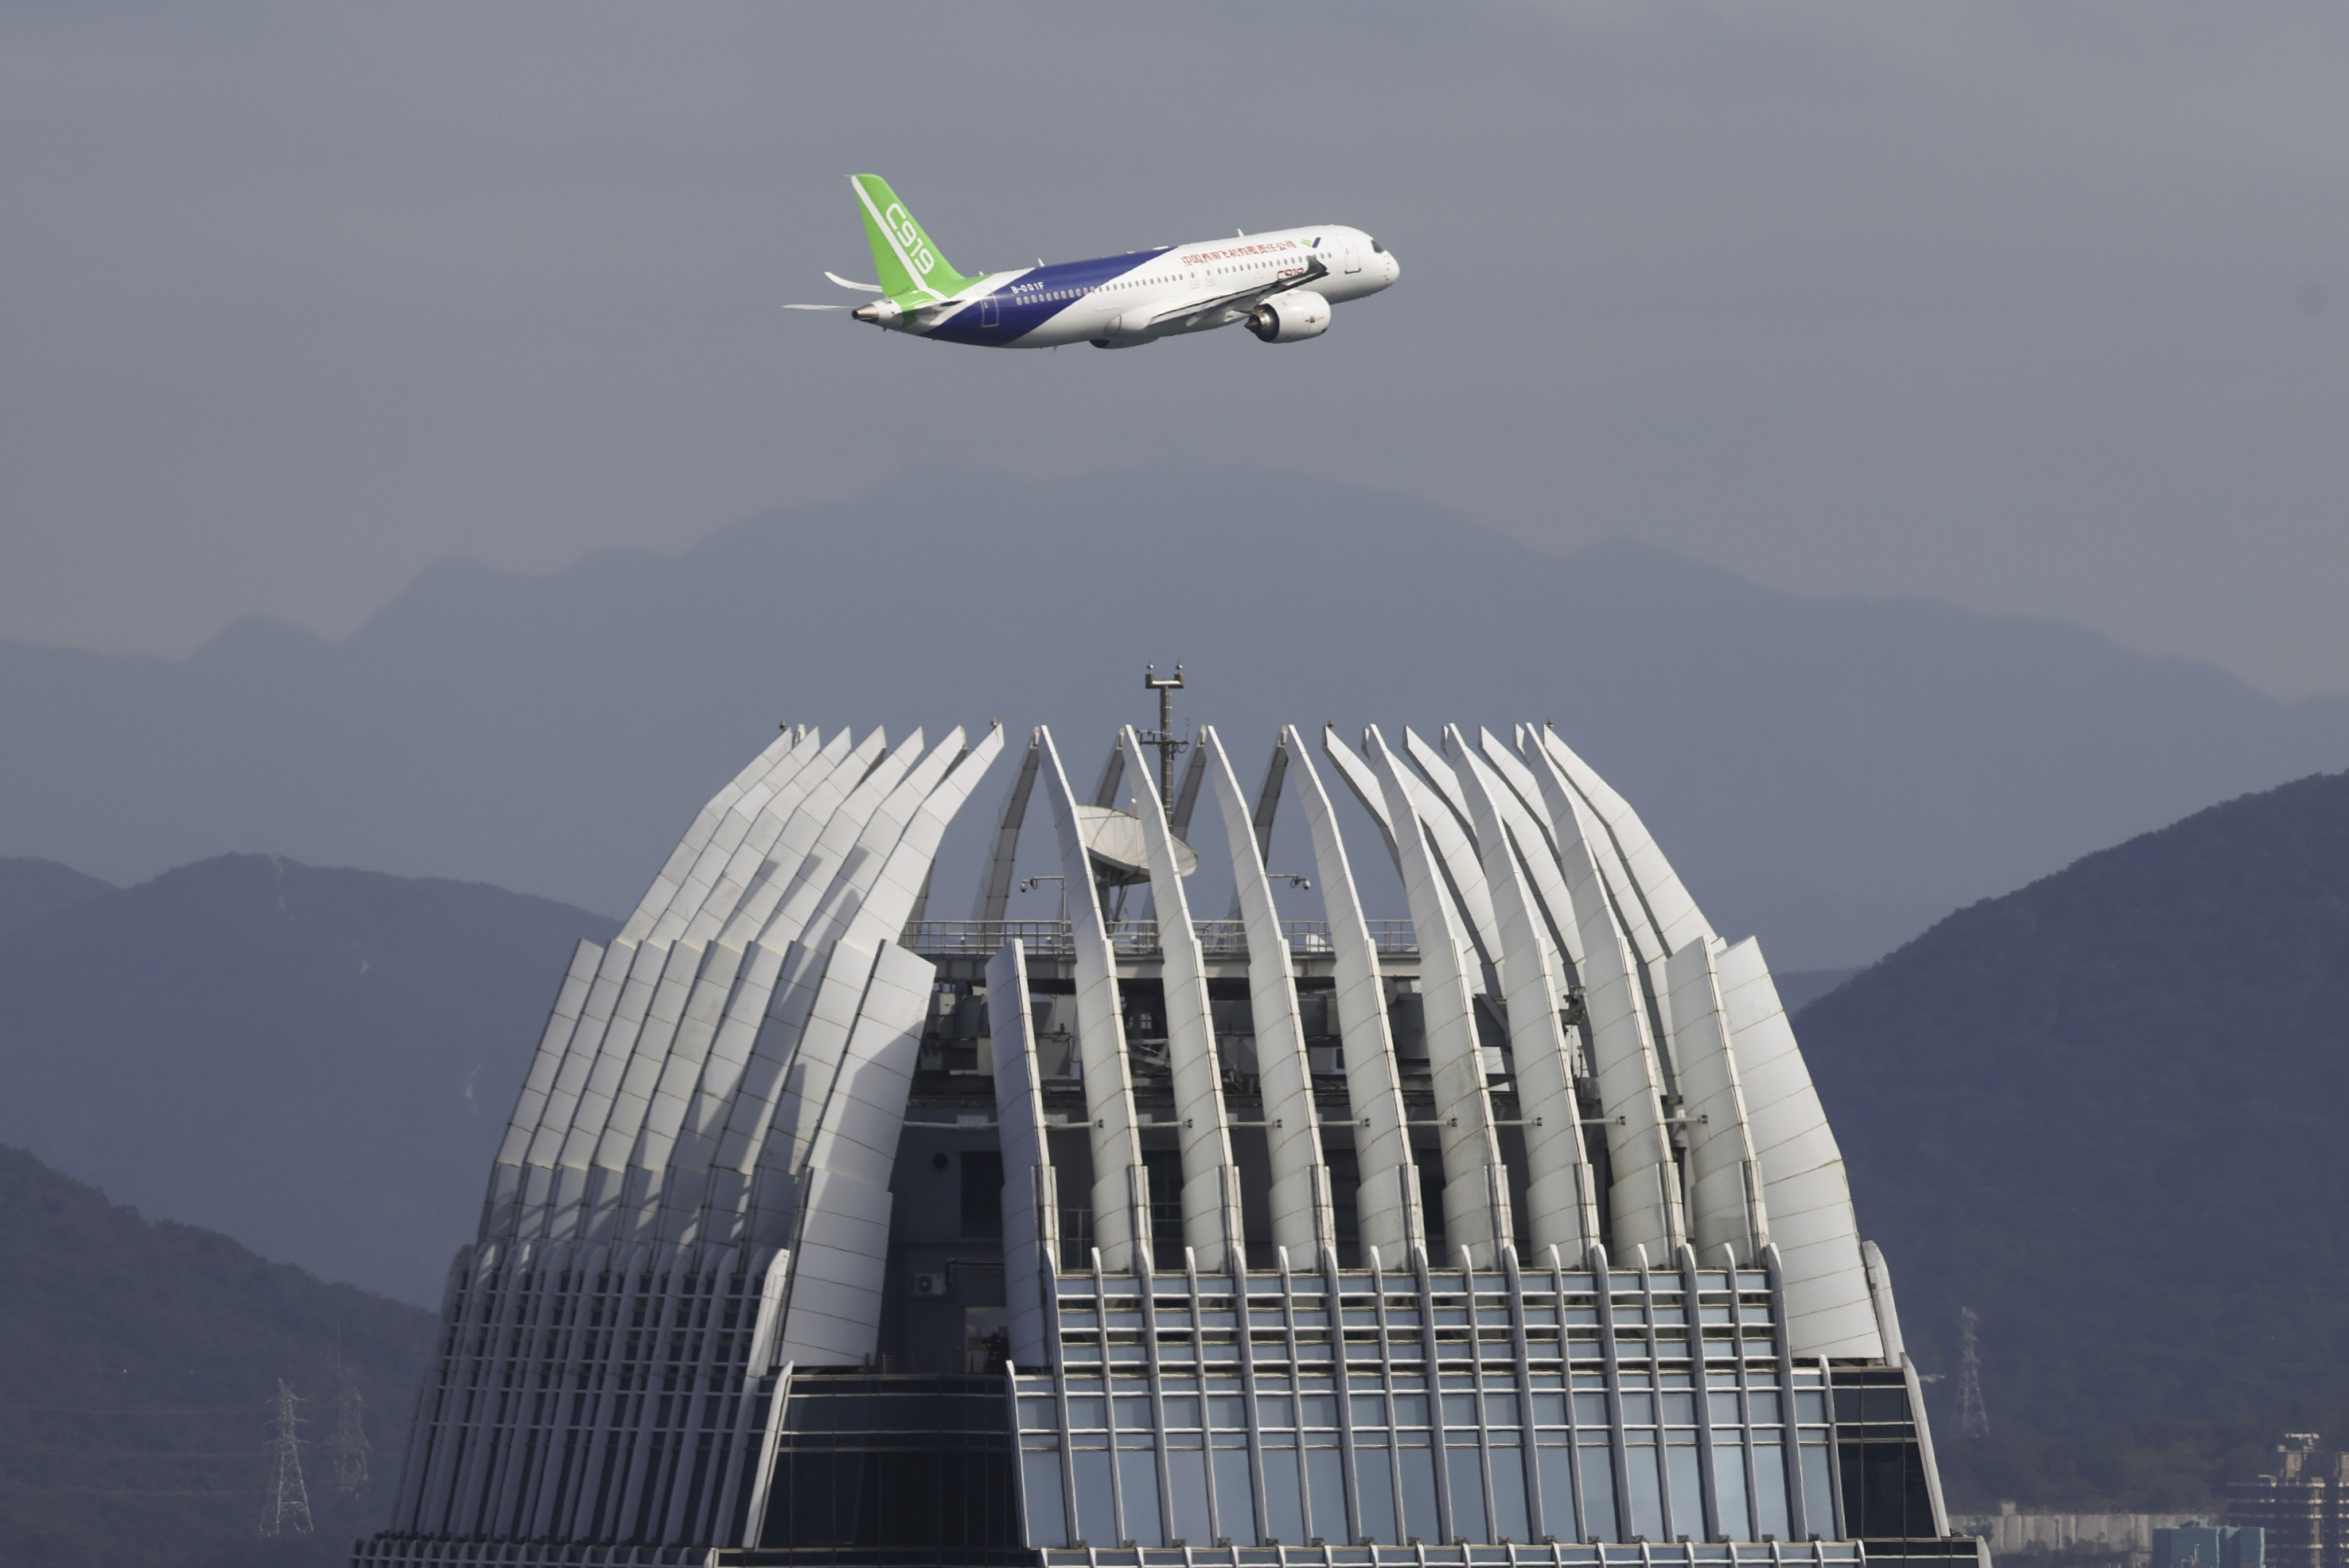 The C919 made two passes over Hong Kong’s Victoria Harbour on Saturday having arrived in the city earlier in the week as part of its first flight outside of mainland China. Photo: Dickson Lee